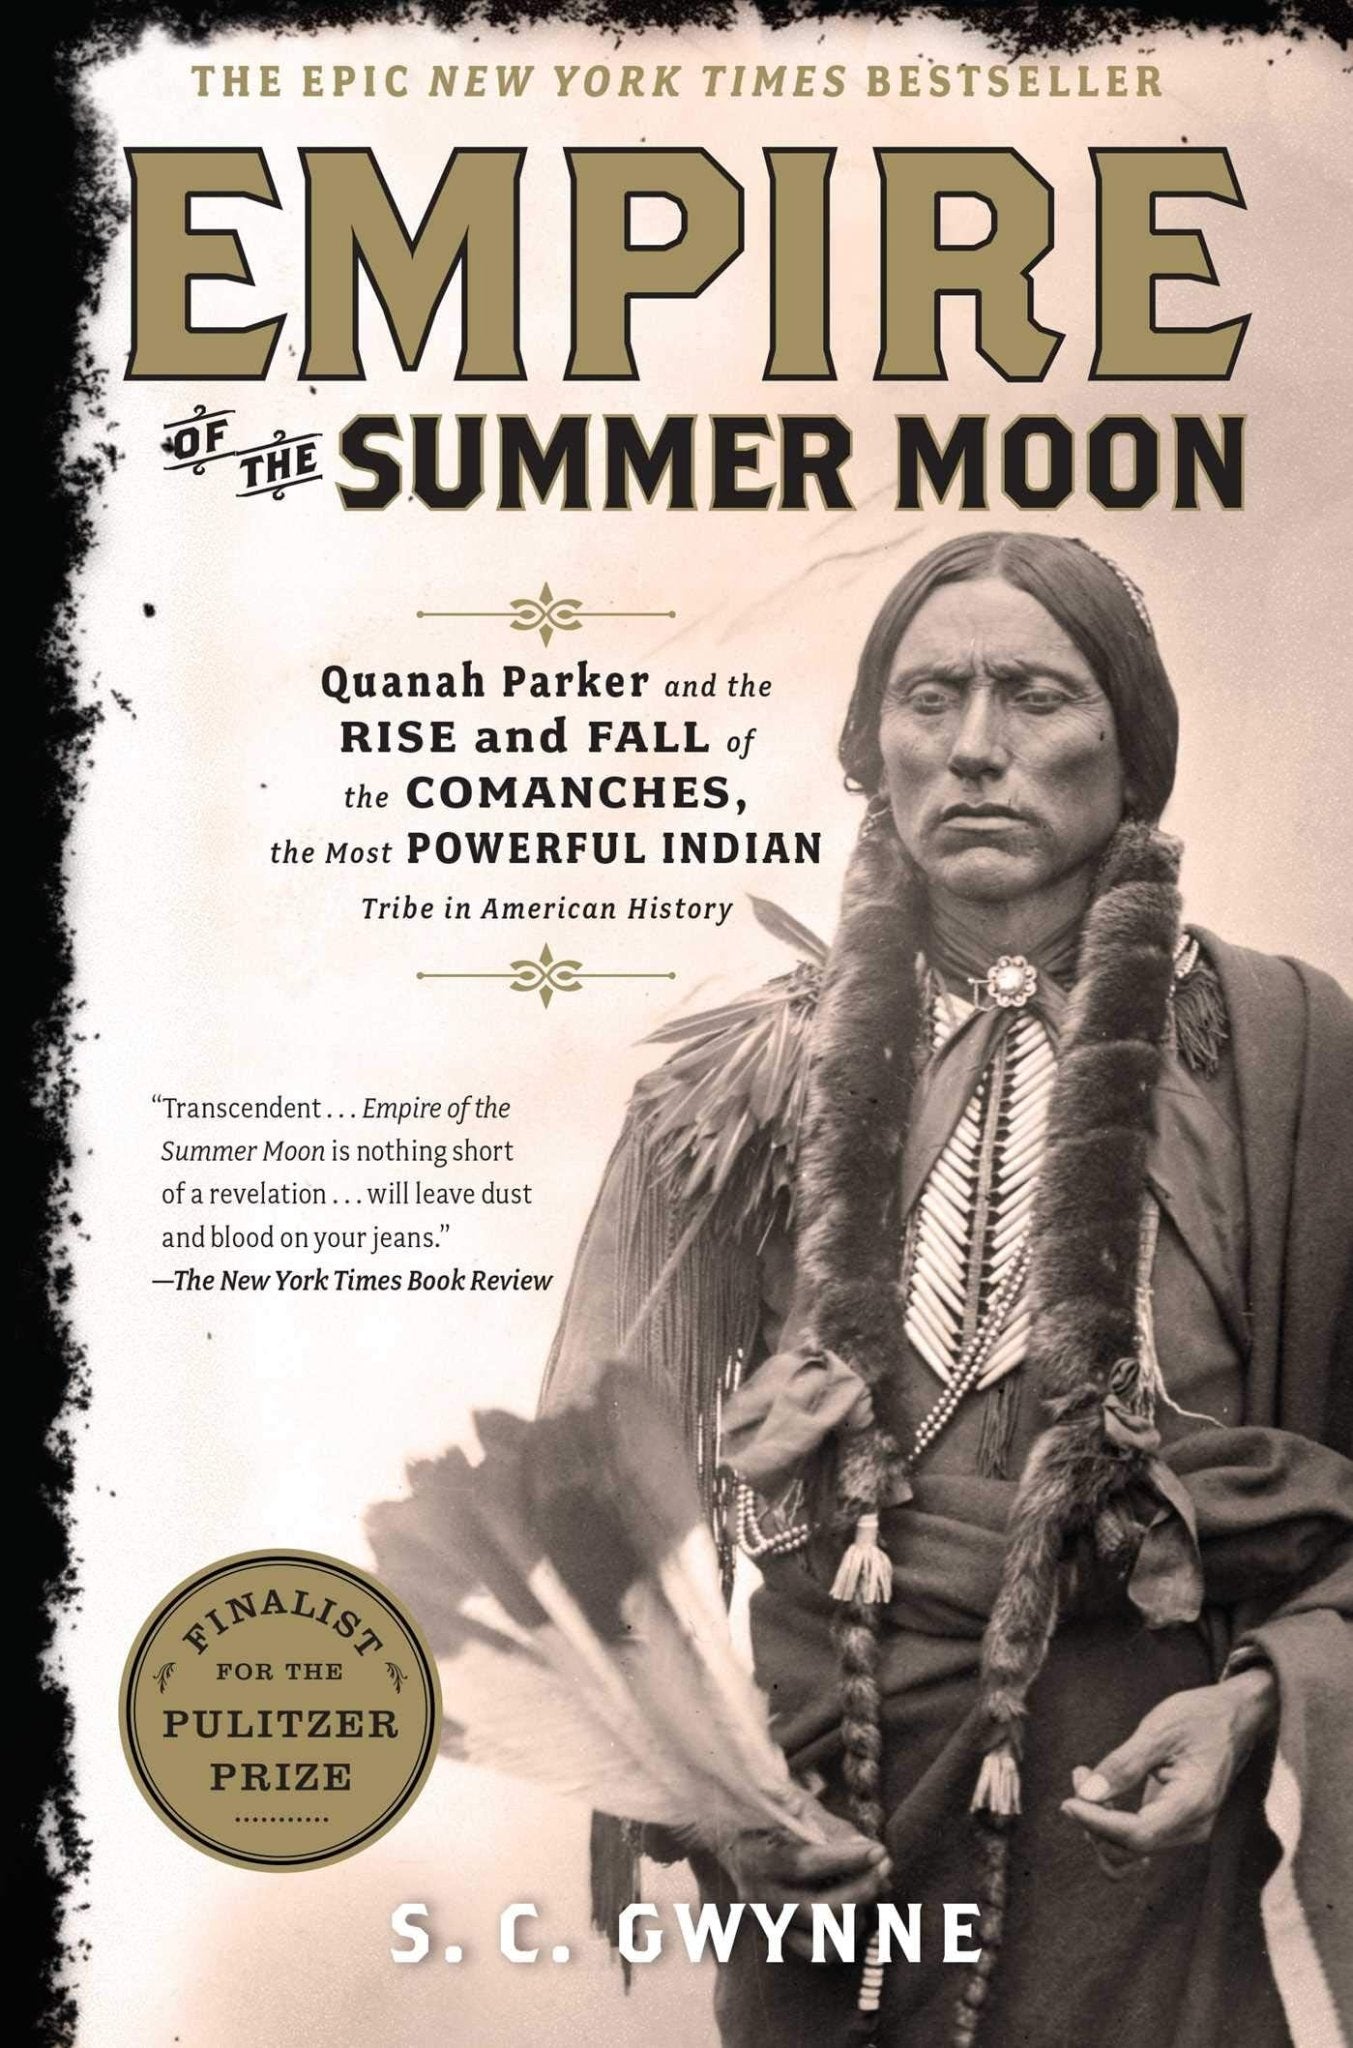 Empire of the Summer Moon: Quanah Parker and the Rise and Fall of the Comanches by S C Gwynne - LV'S Global Media